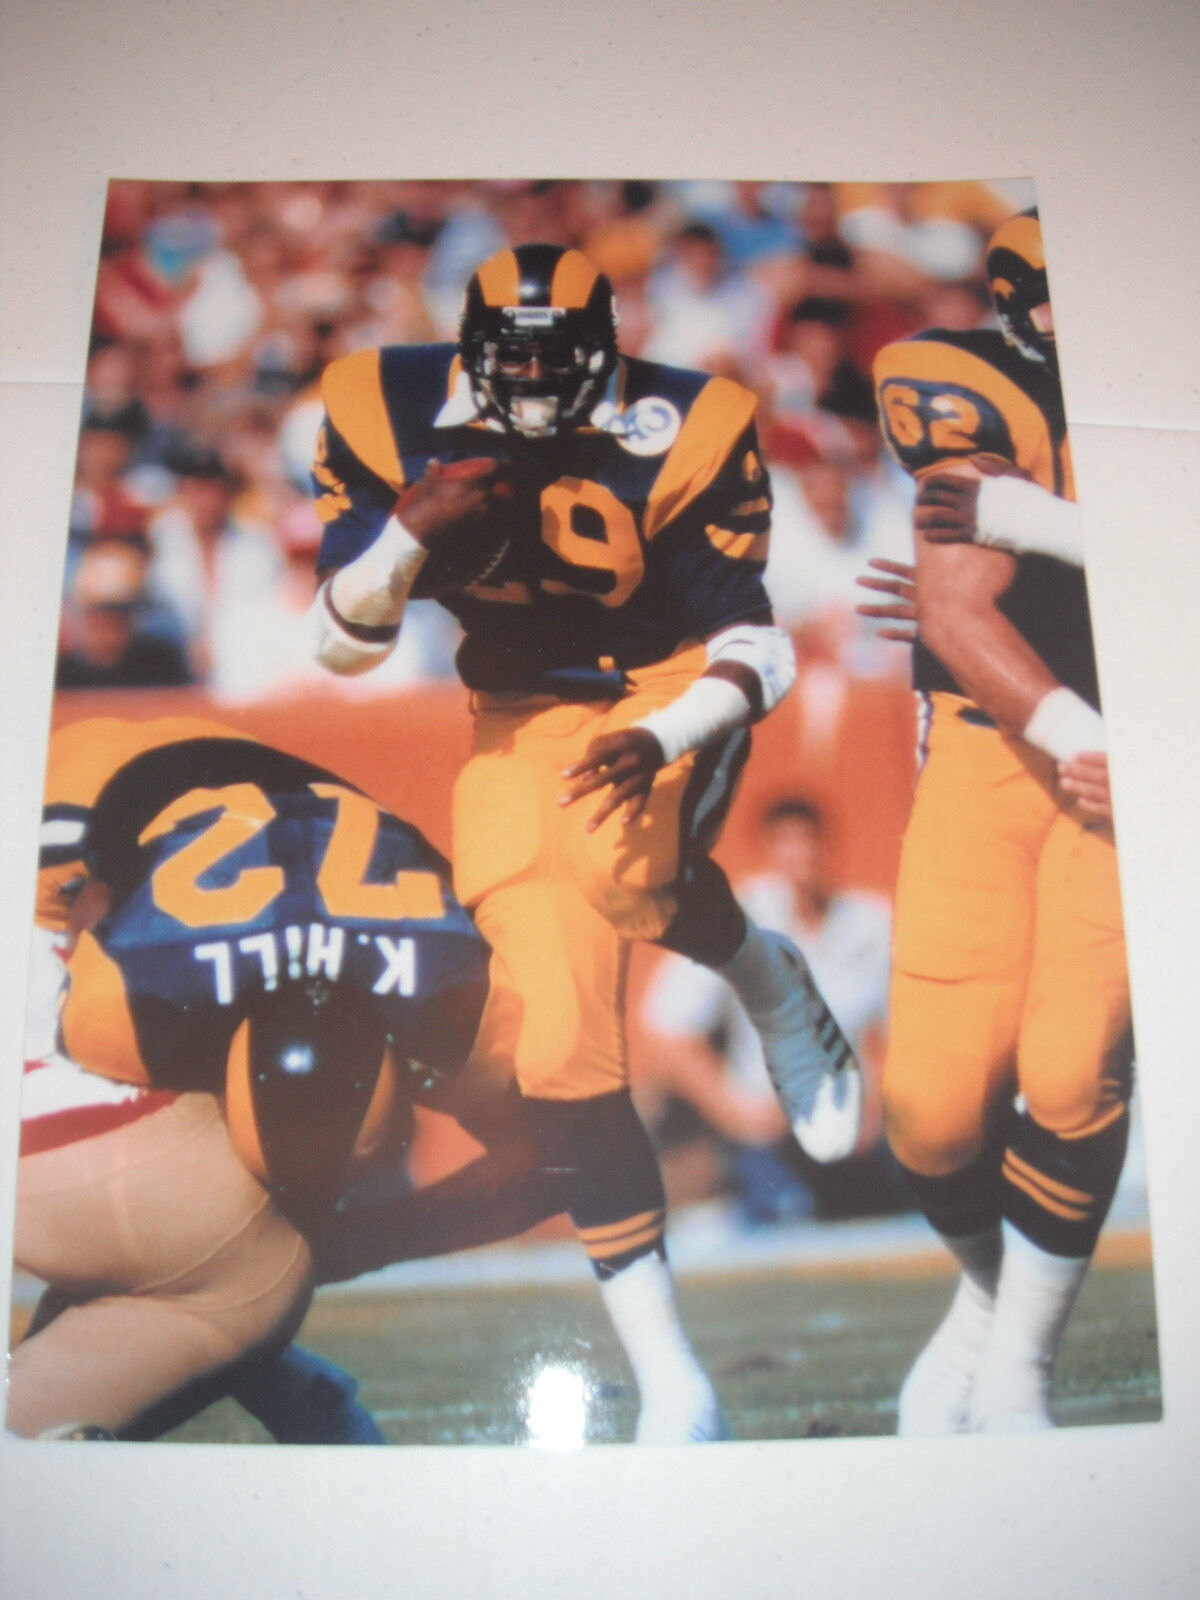 Eric Dickerson Football Live Color 11x14 Promo Photo Poster painting